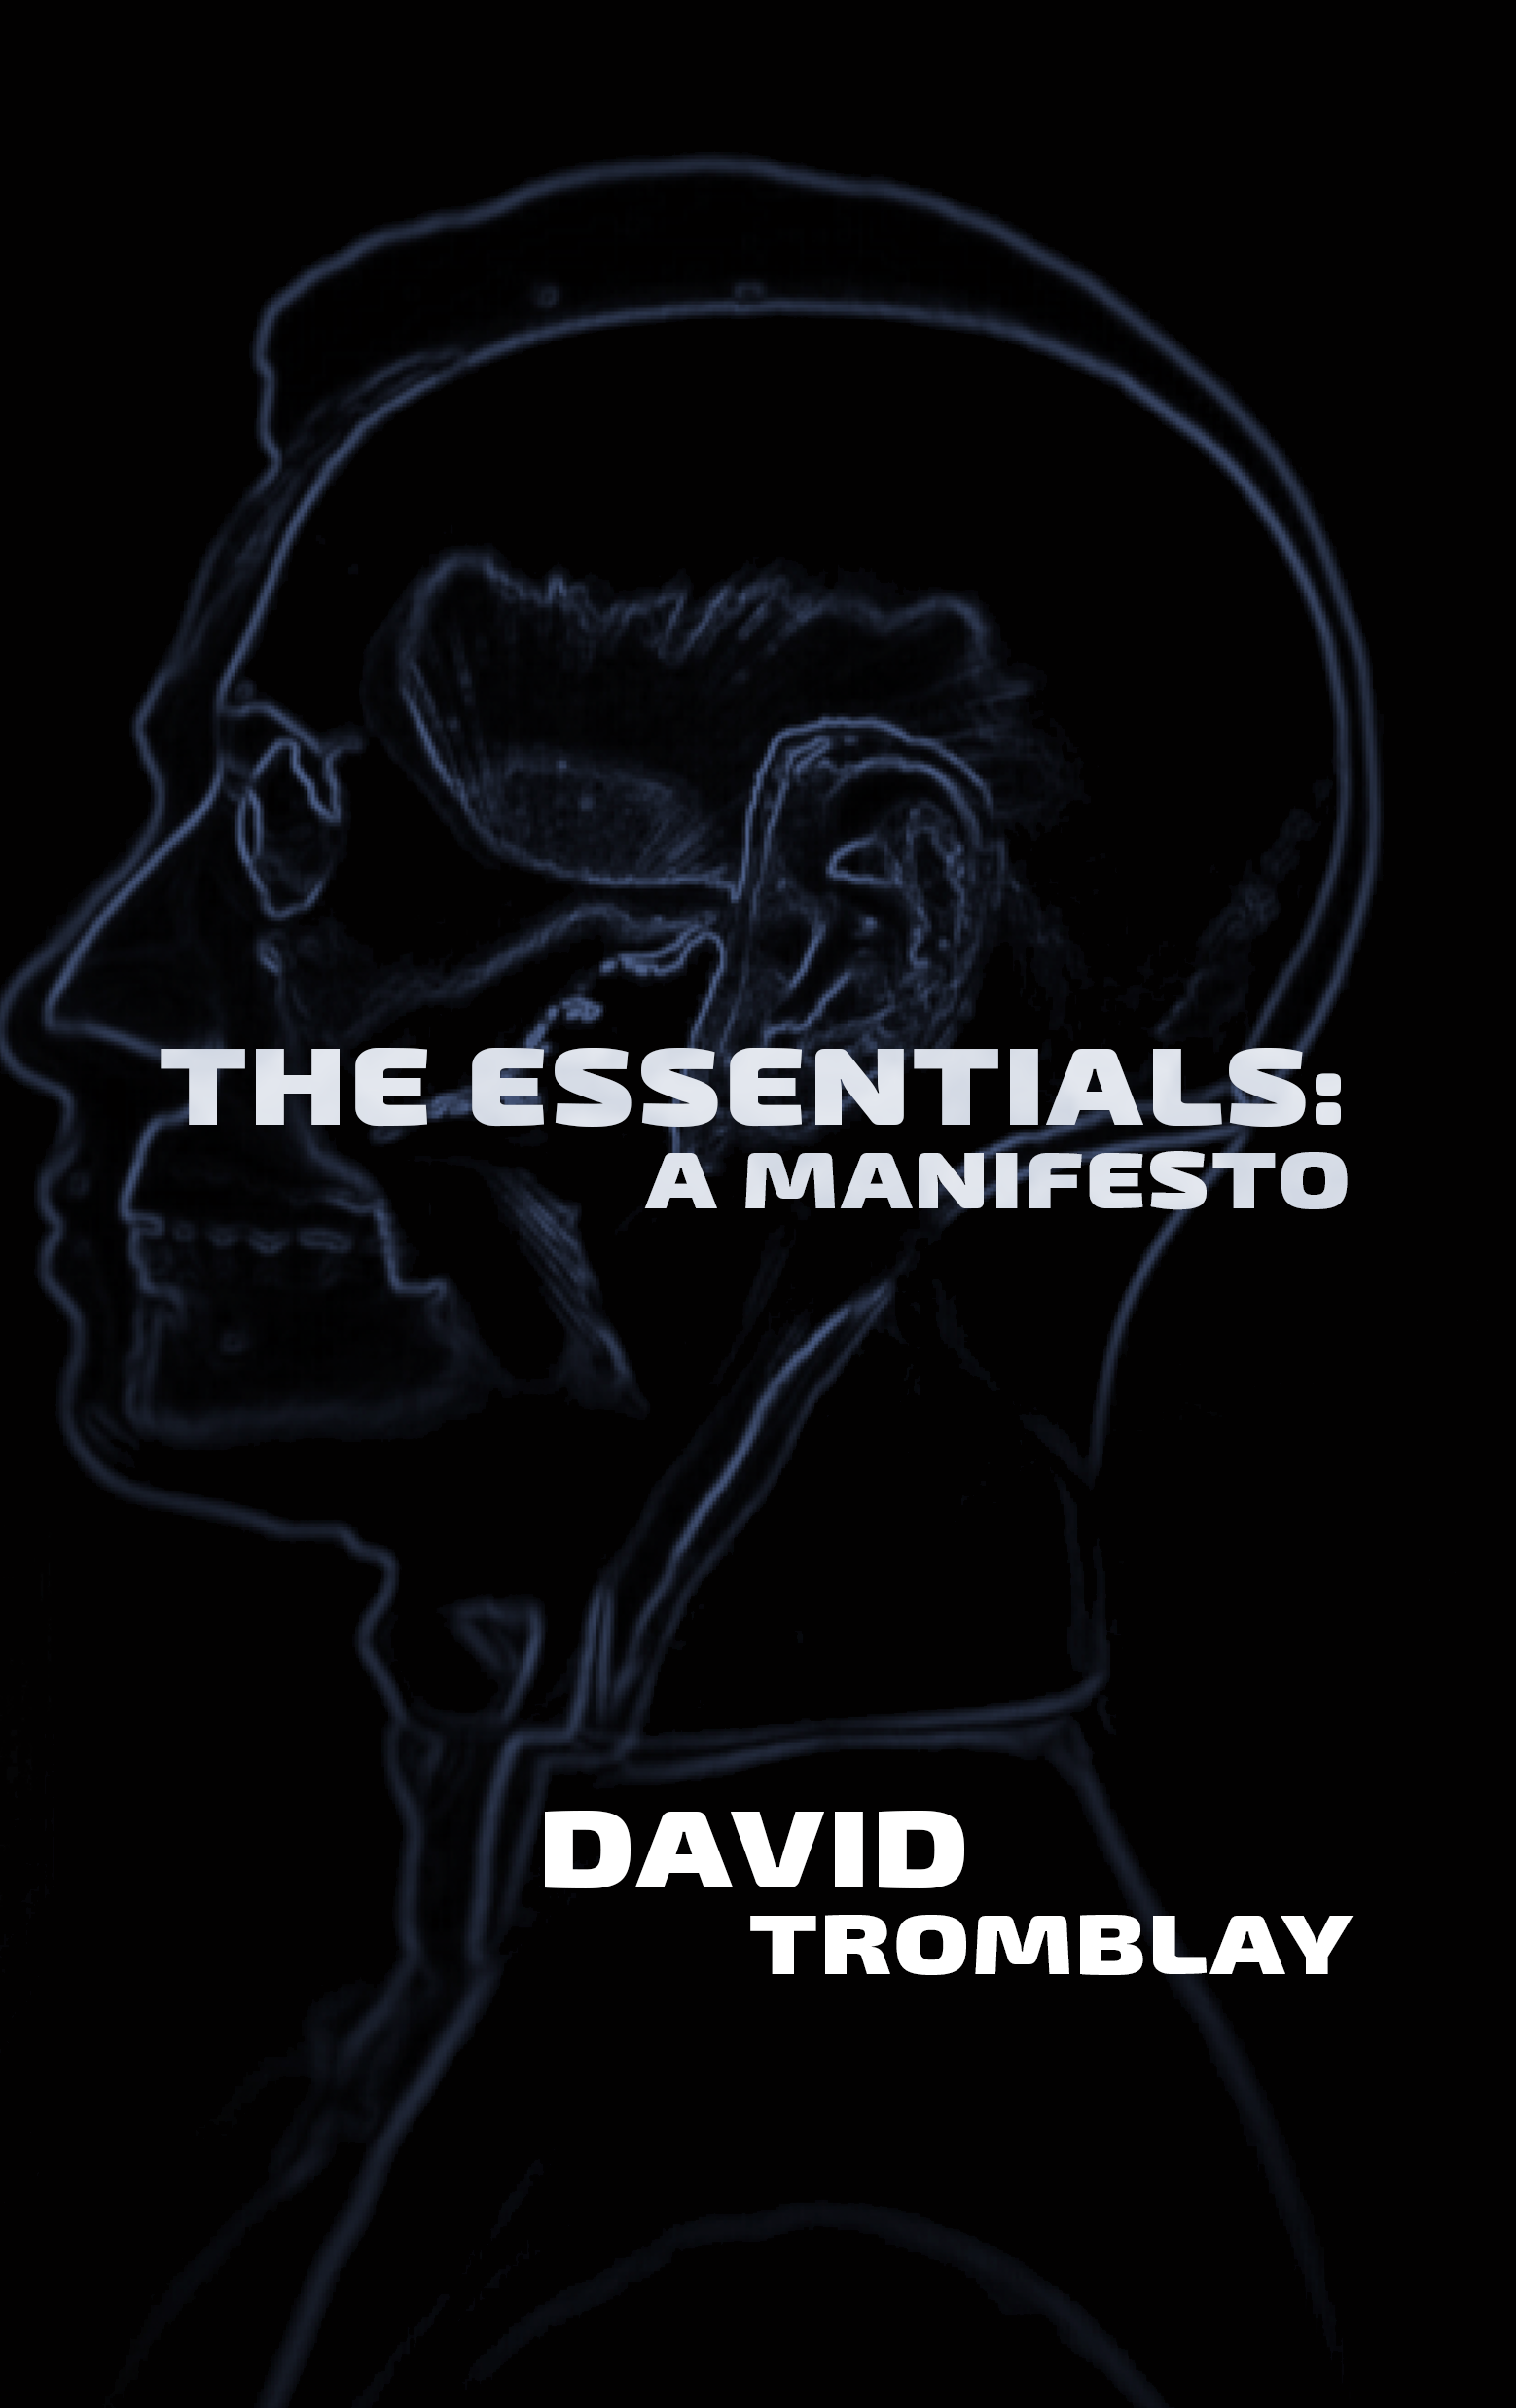 https://whiskeytit.com/wp-content/uploads/2020/11/The-ESSENTIALS-frontcover-web.png